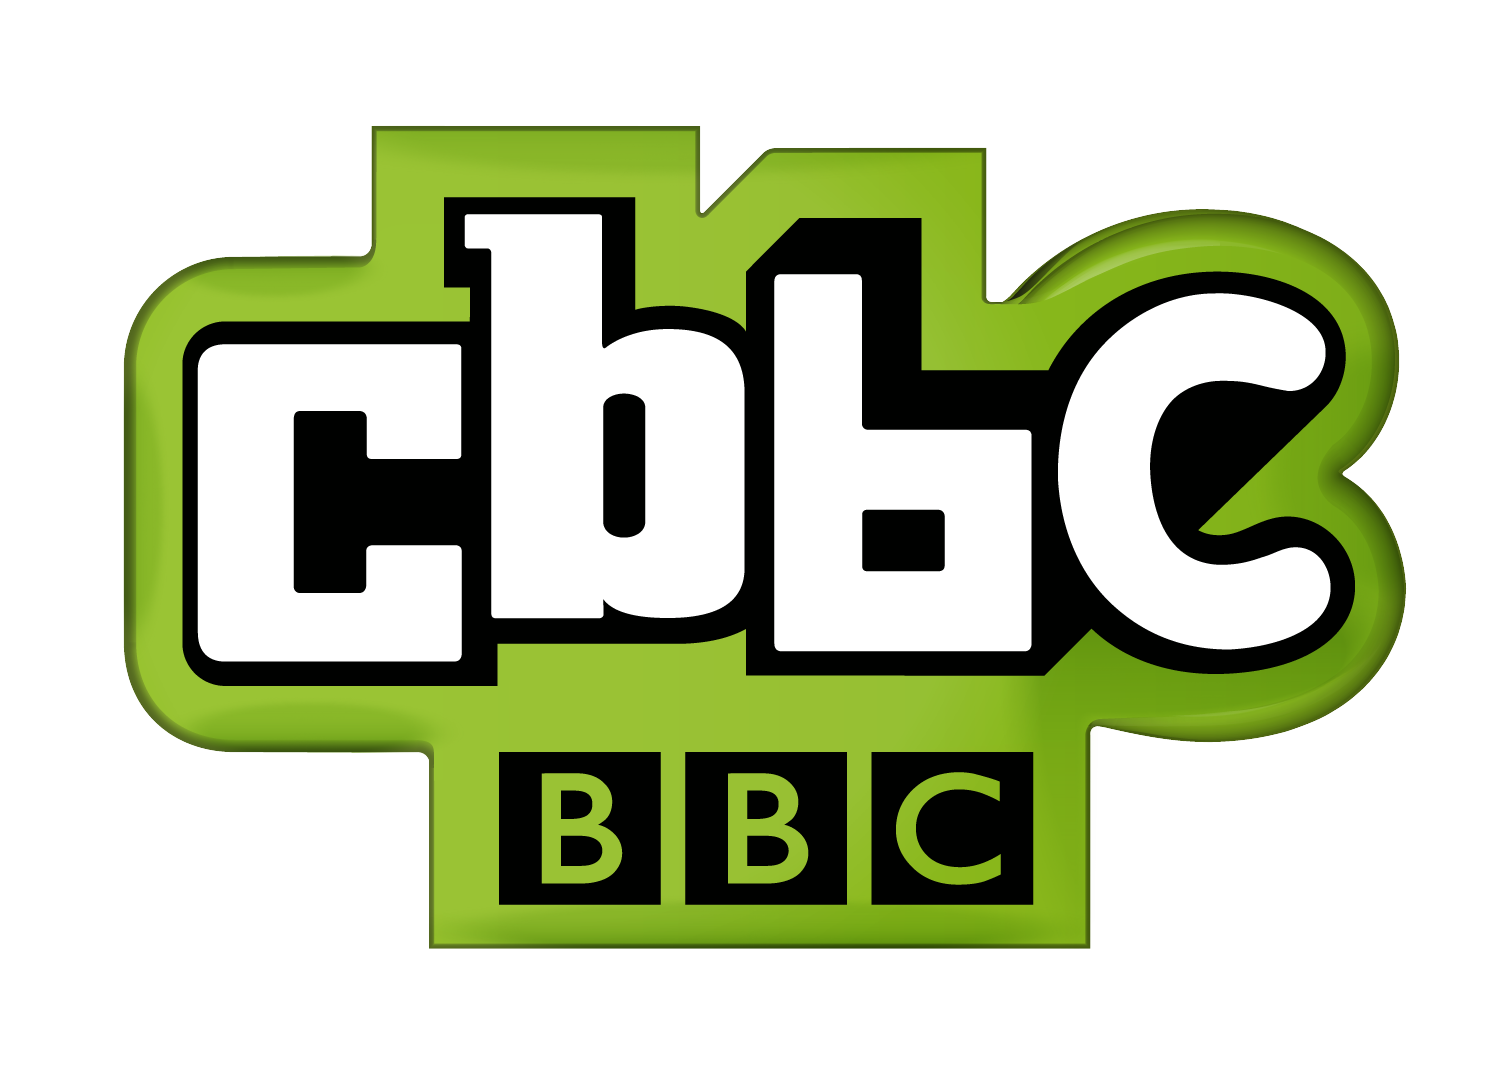 The Old Cbbc Website Games